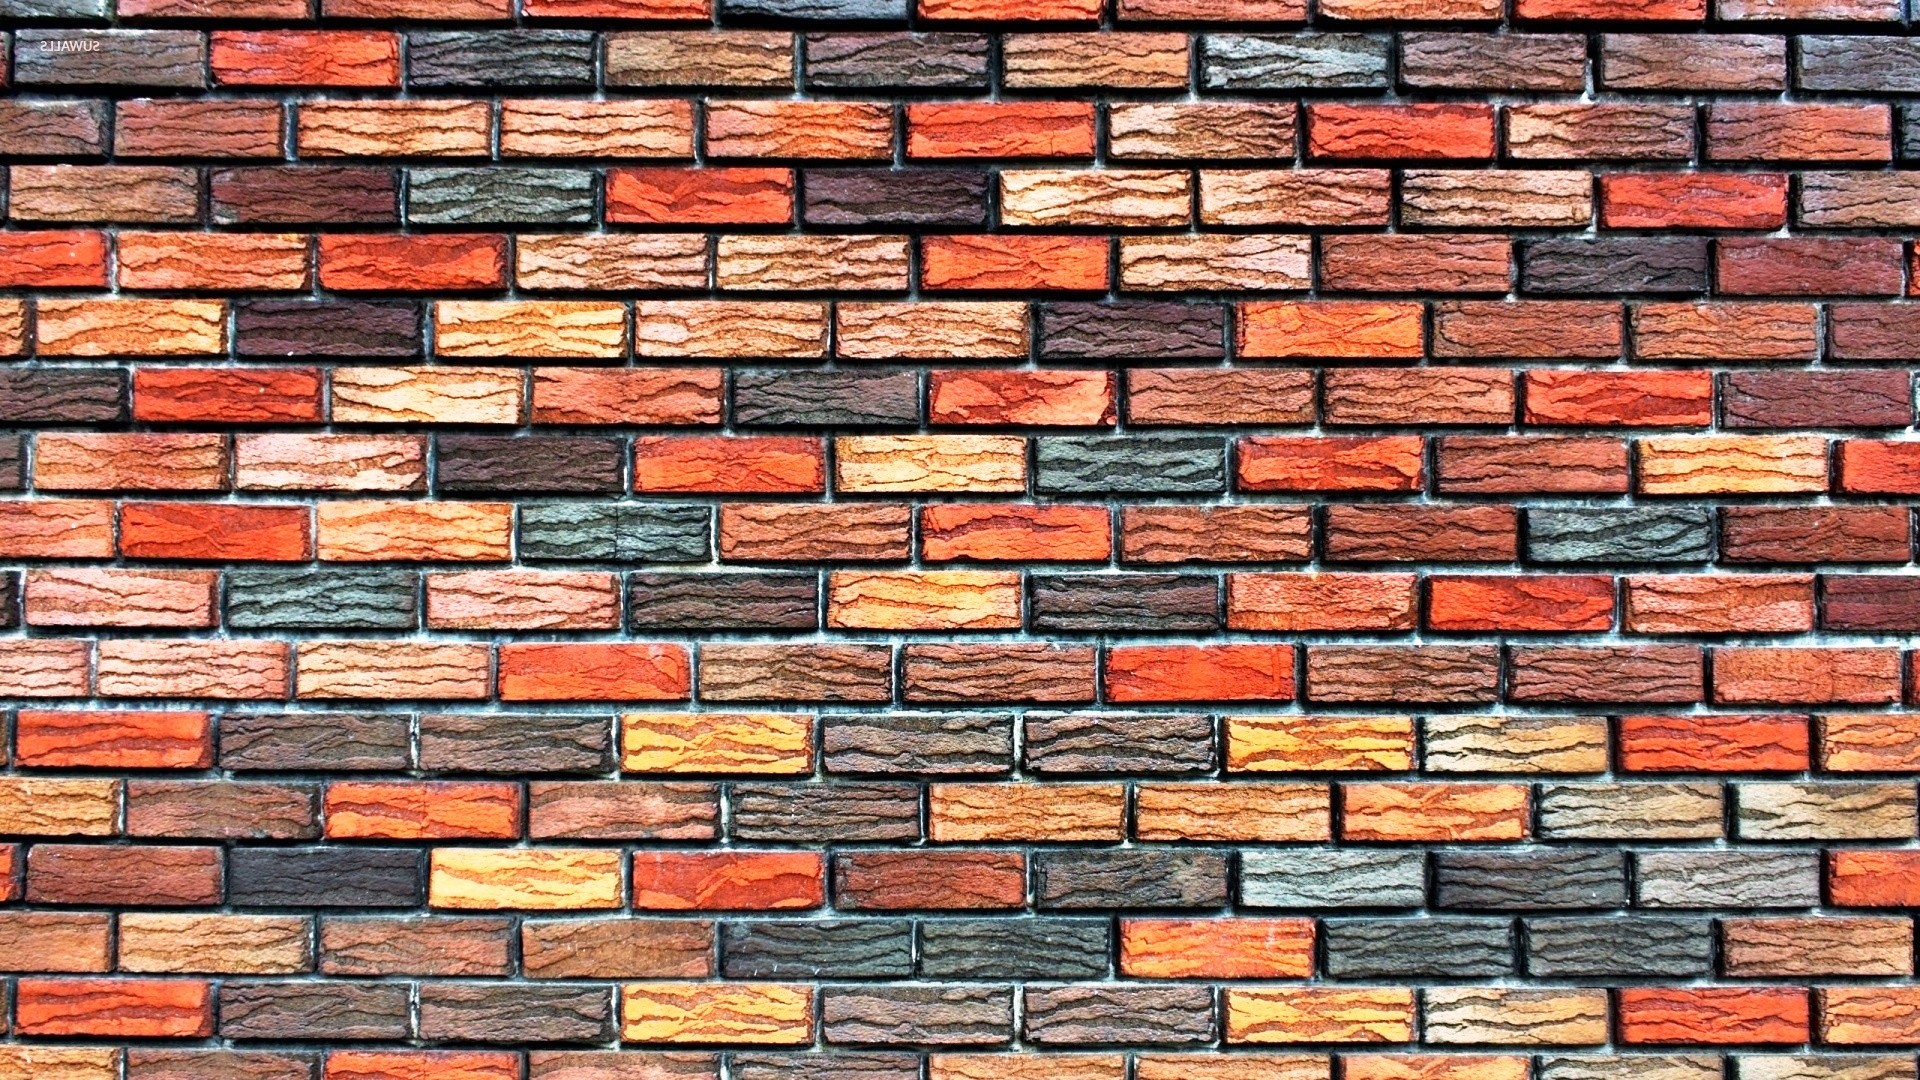 Brick Mac Wallpaper with high-resolution 1920x1080 pixel. You can use and set as wallpaper for Notebook Screensavers, Mac Wallpapers, Mobile Home Screen, iPhone or Android Phones Lock Screen